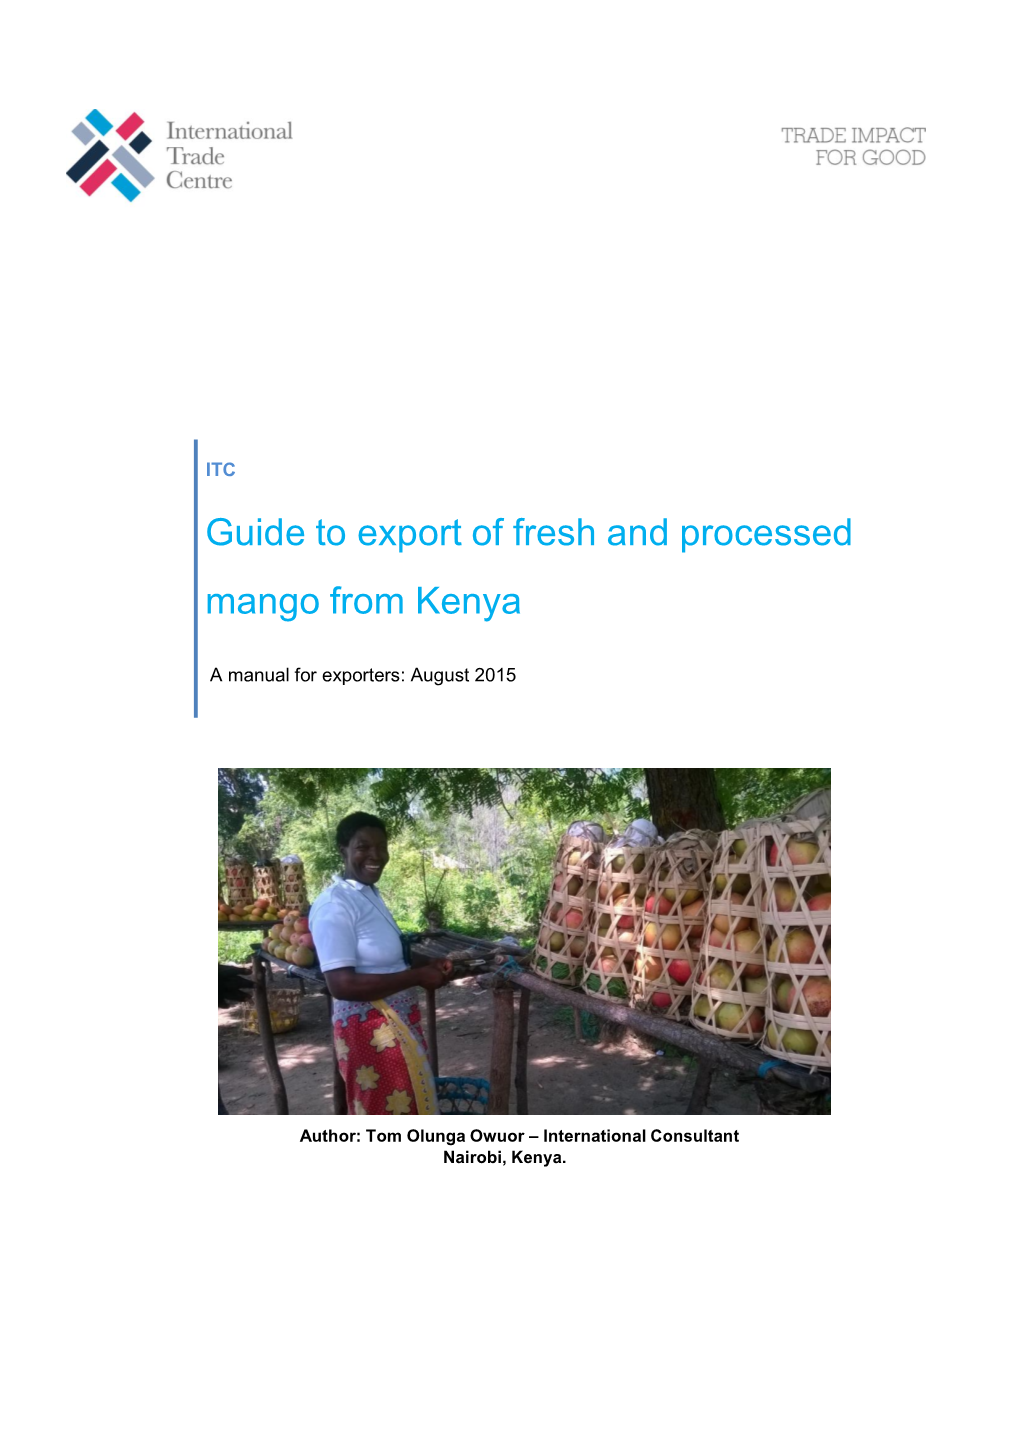 Guide to Export of Fresh and Processed Mango in Kenya